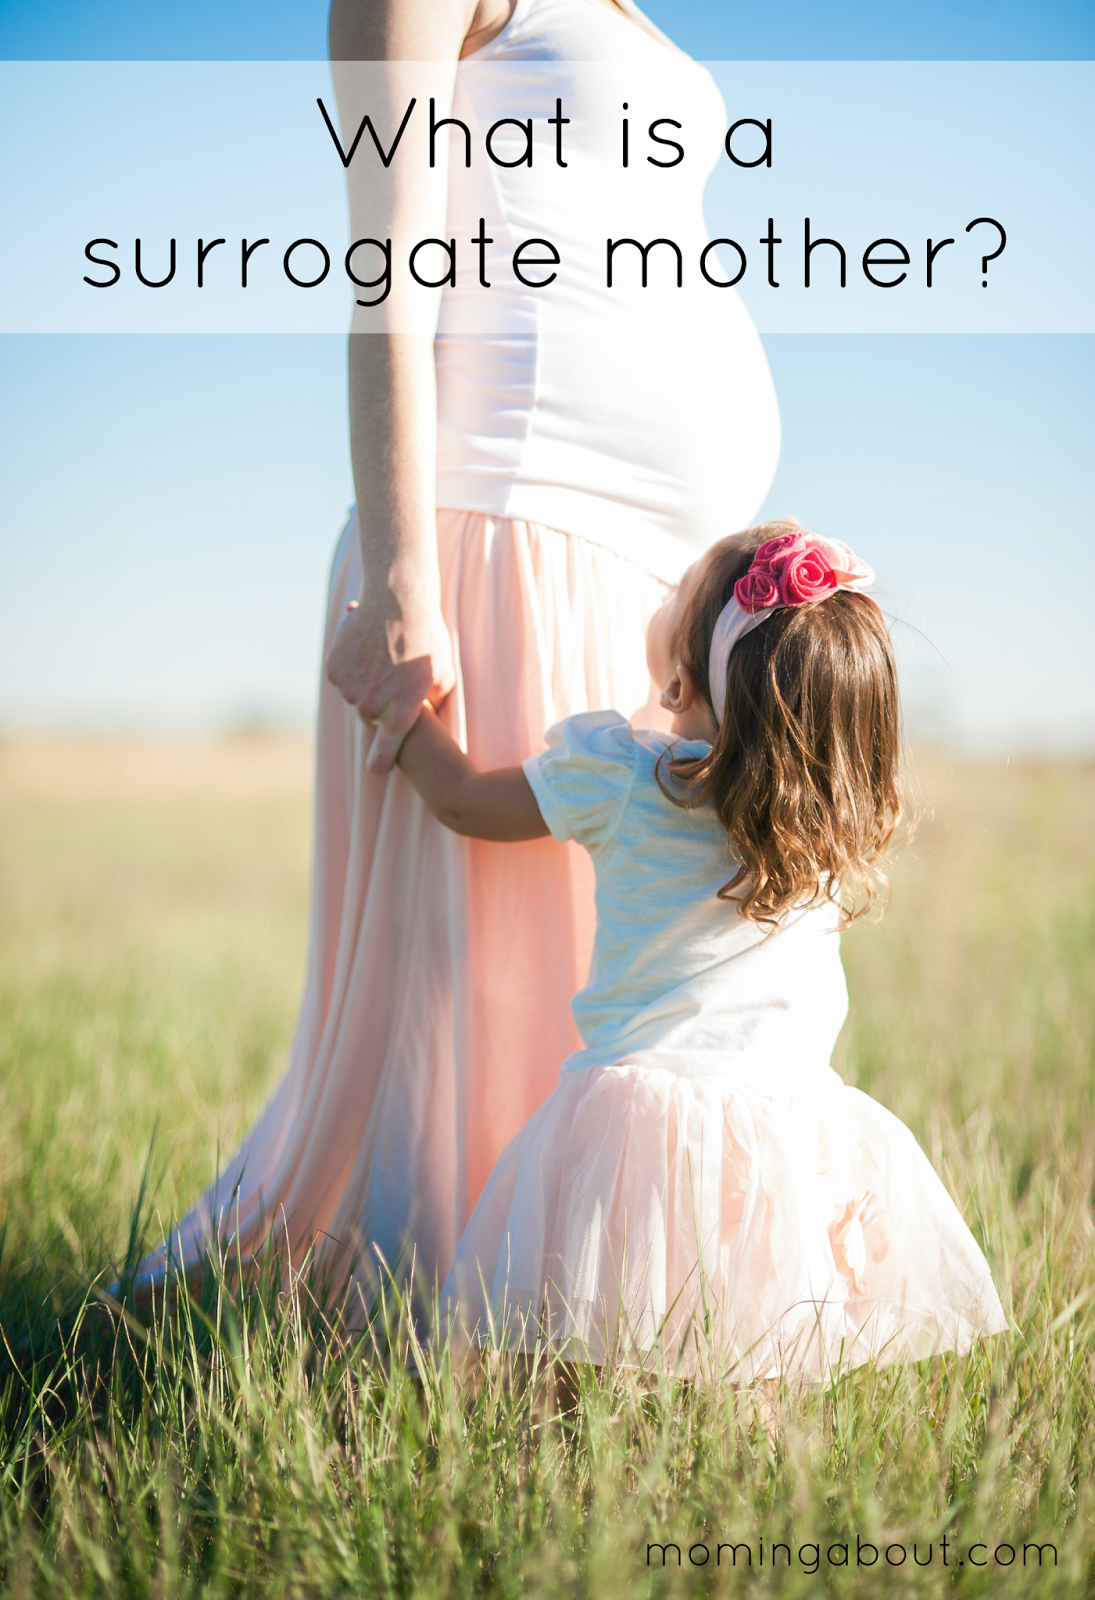 moming-about-what-is-a-surrogate-mother